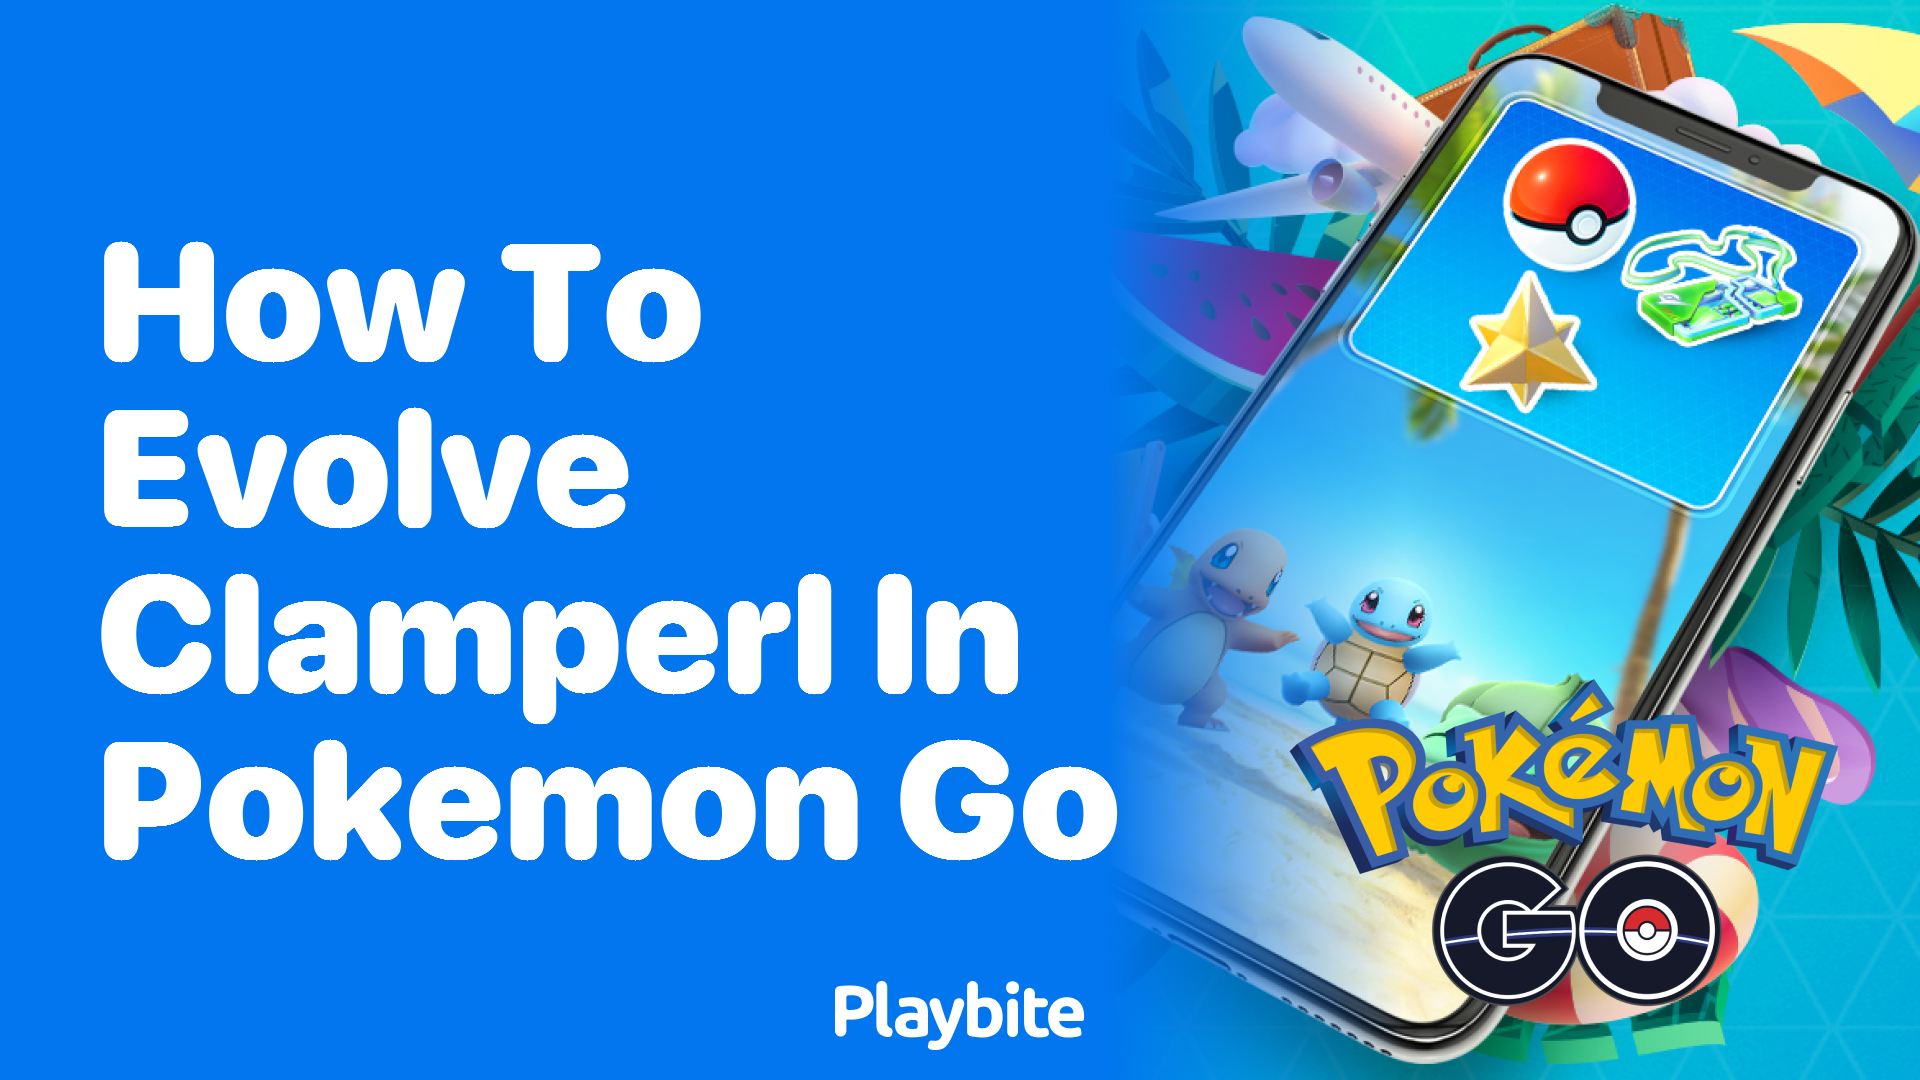 How to Evolve Clamperl in Pokémon GO